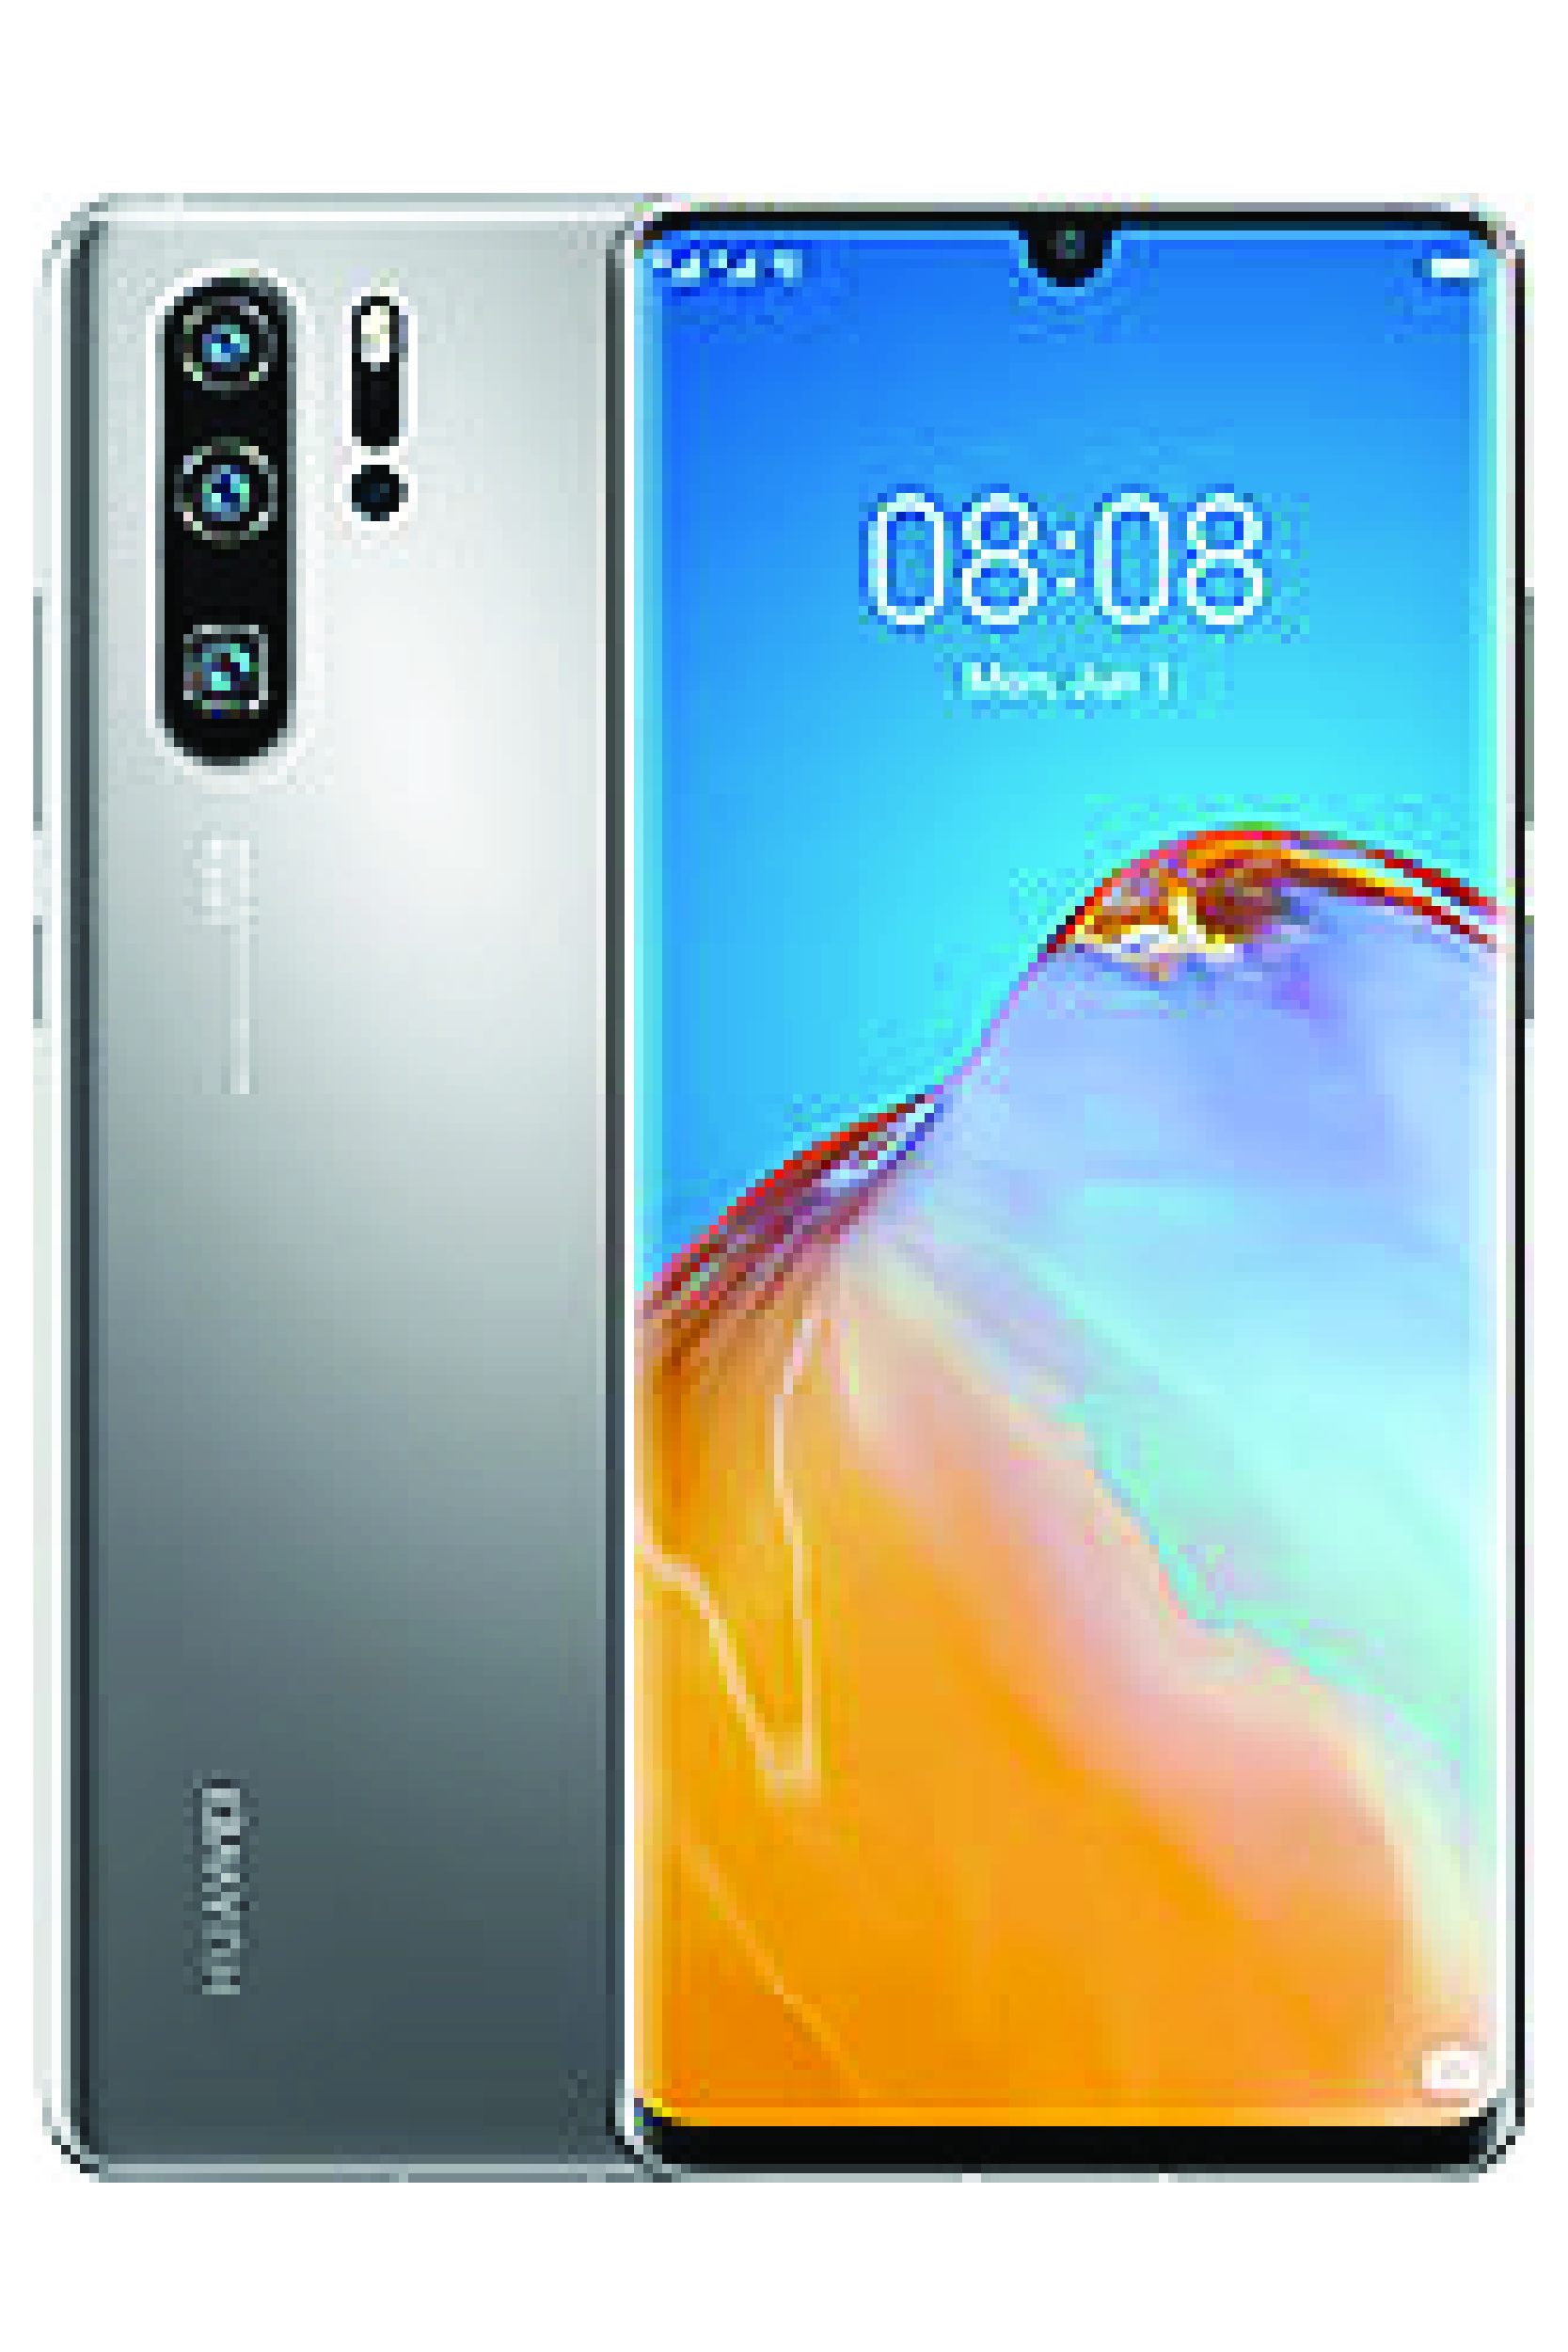 Huawei P30 Pro New Edition Price in Pakistan & Specs: Daily Updated